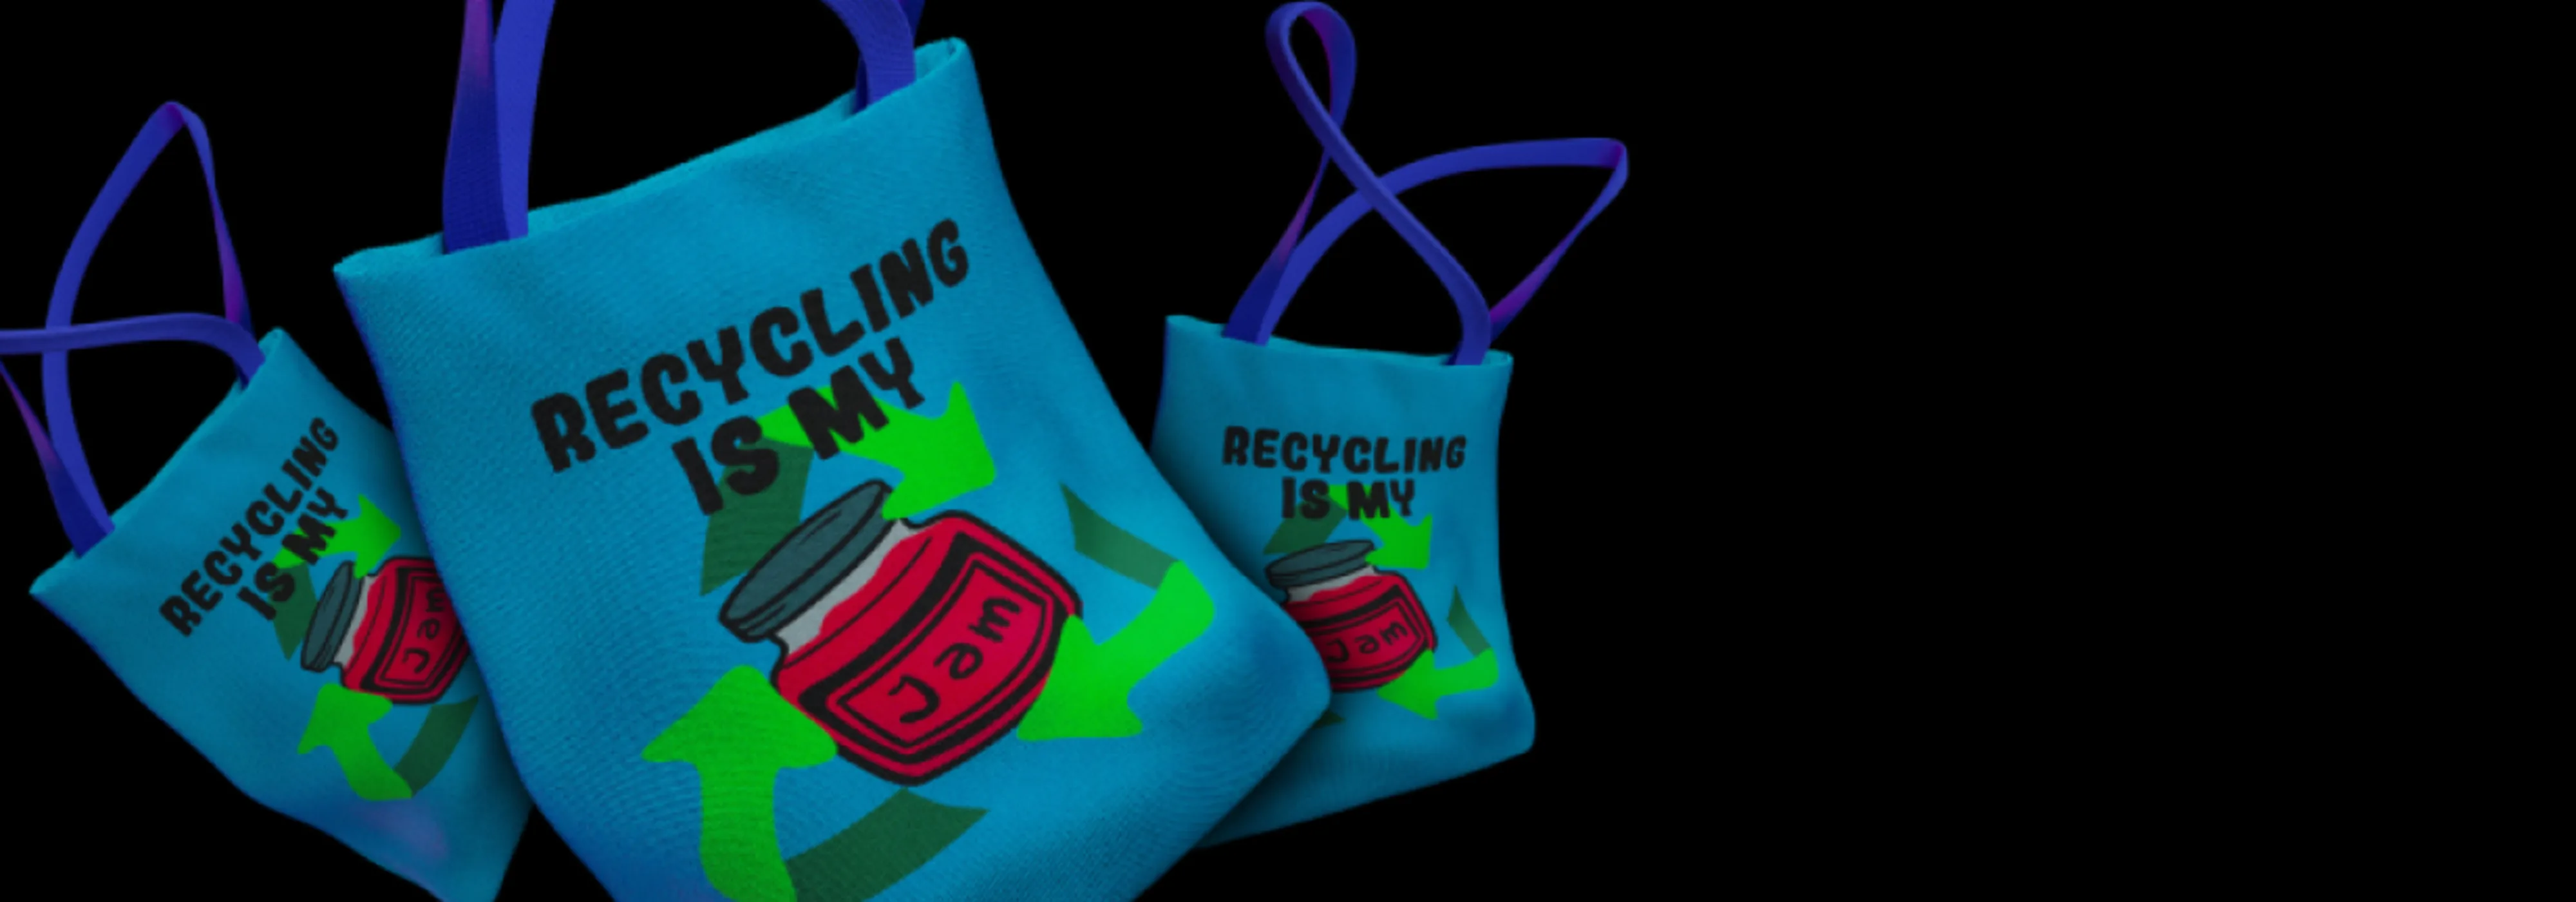 Three blue tote bags, each with text reading 'recycling is my jam'.